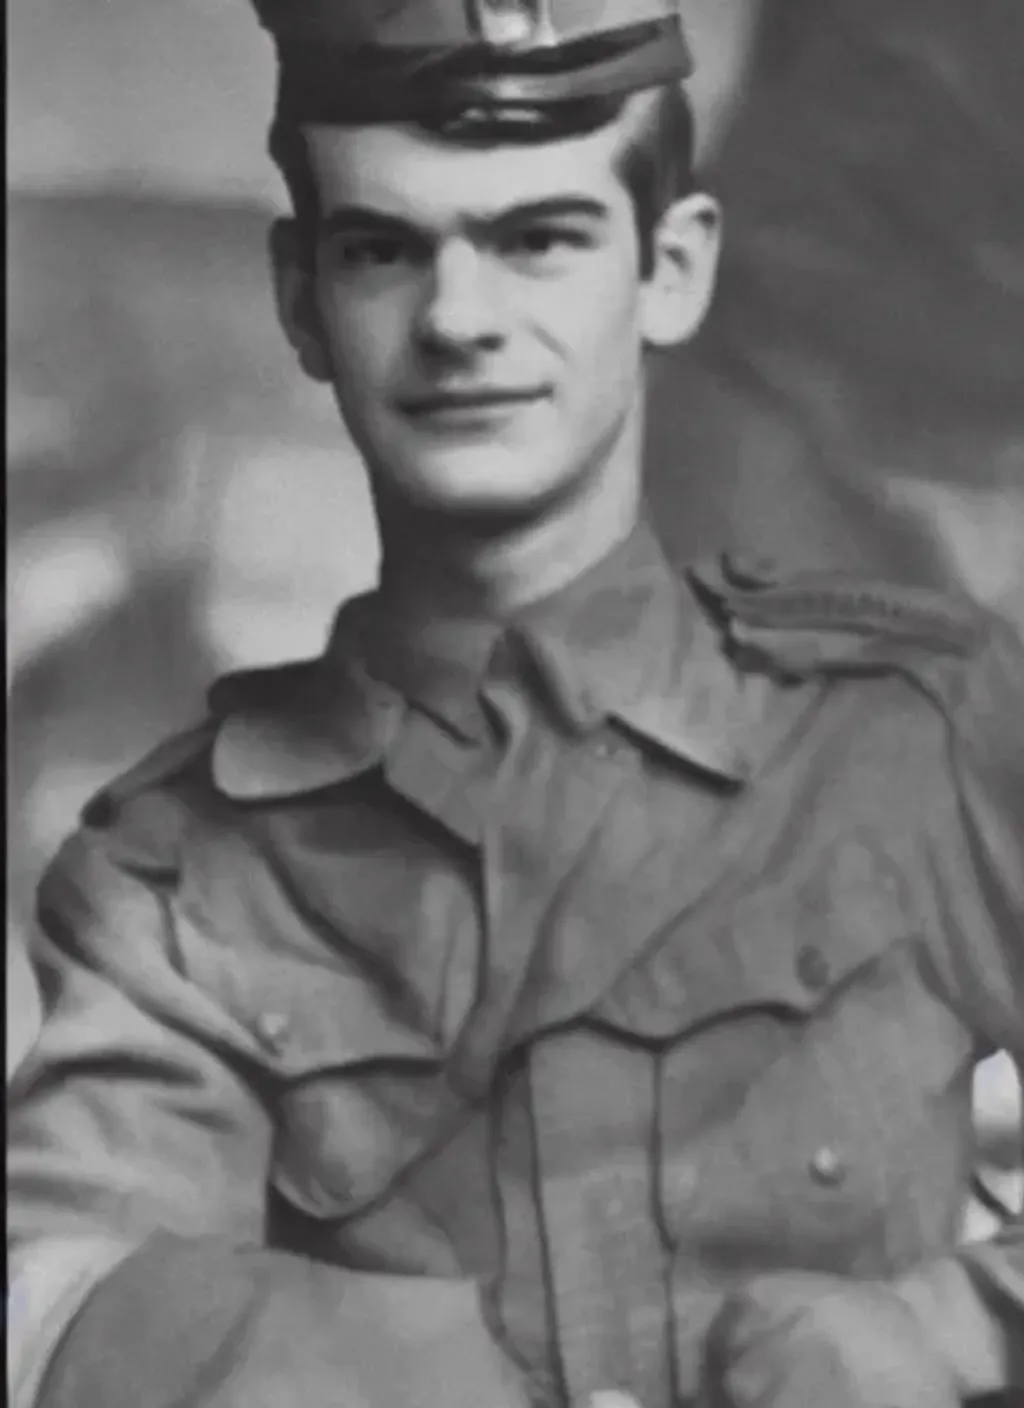 Prompt: Photograph of Andrew Garfield as a soldier in World War II, black and white